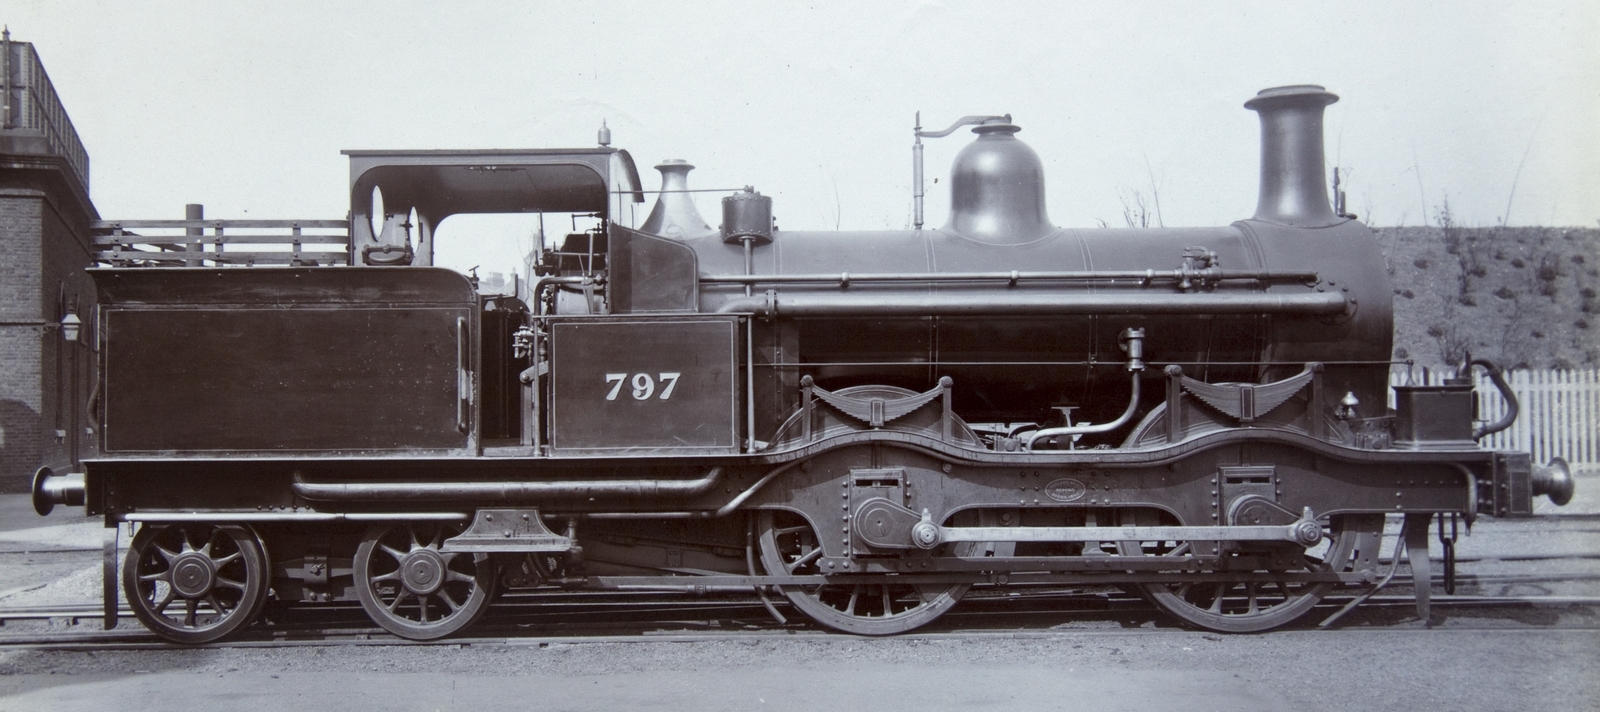 No. 797 after the rebuild by Johnson